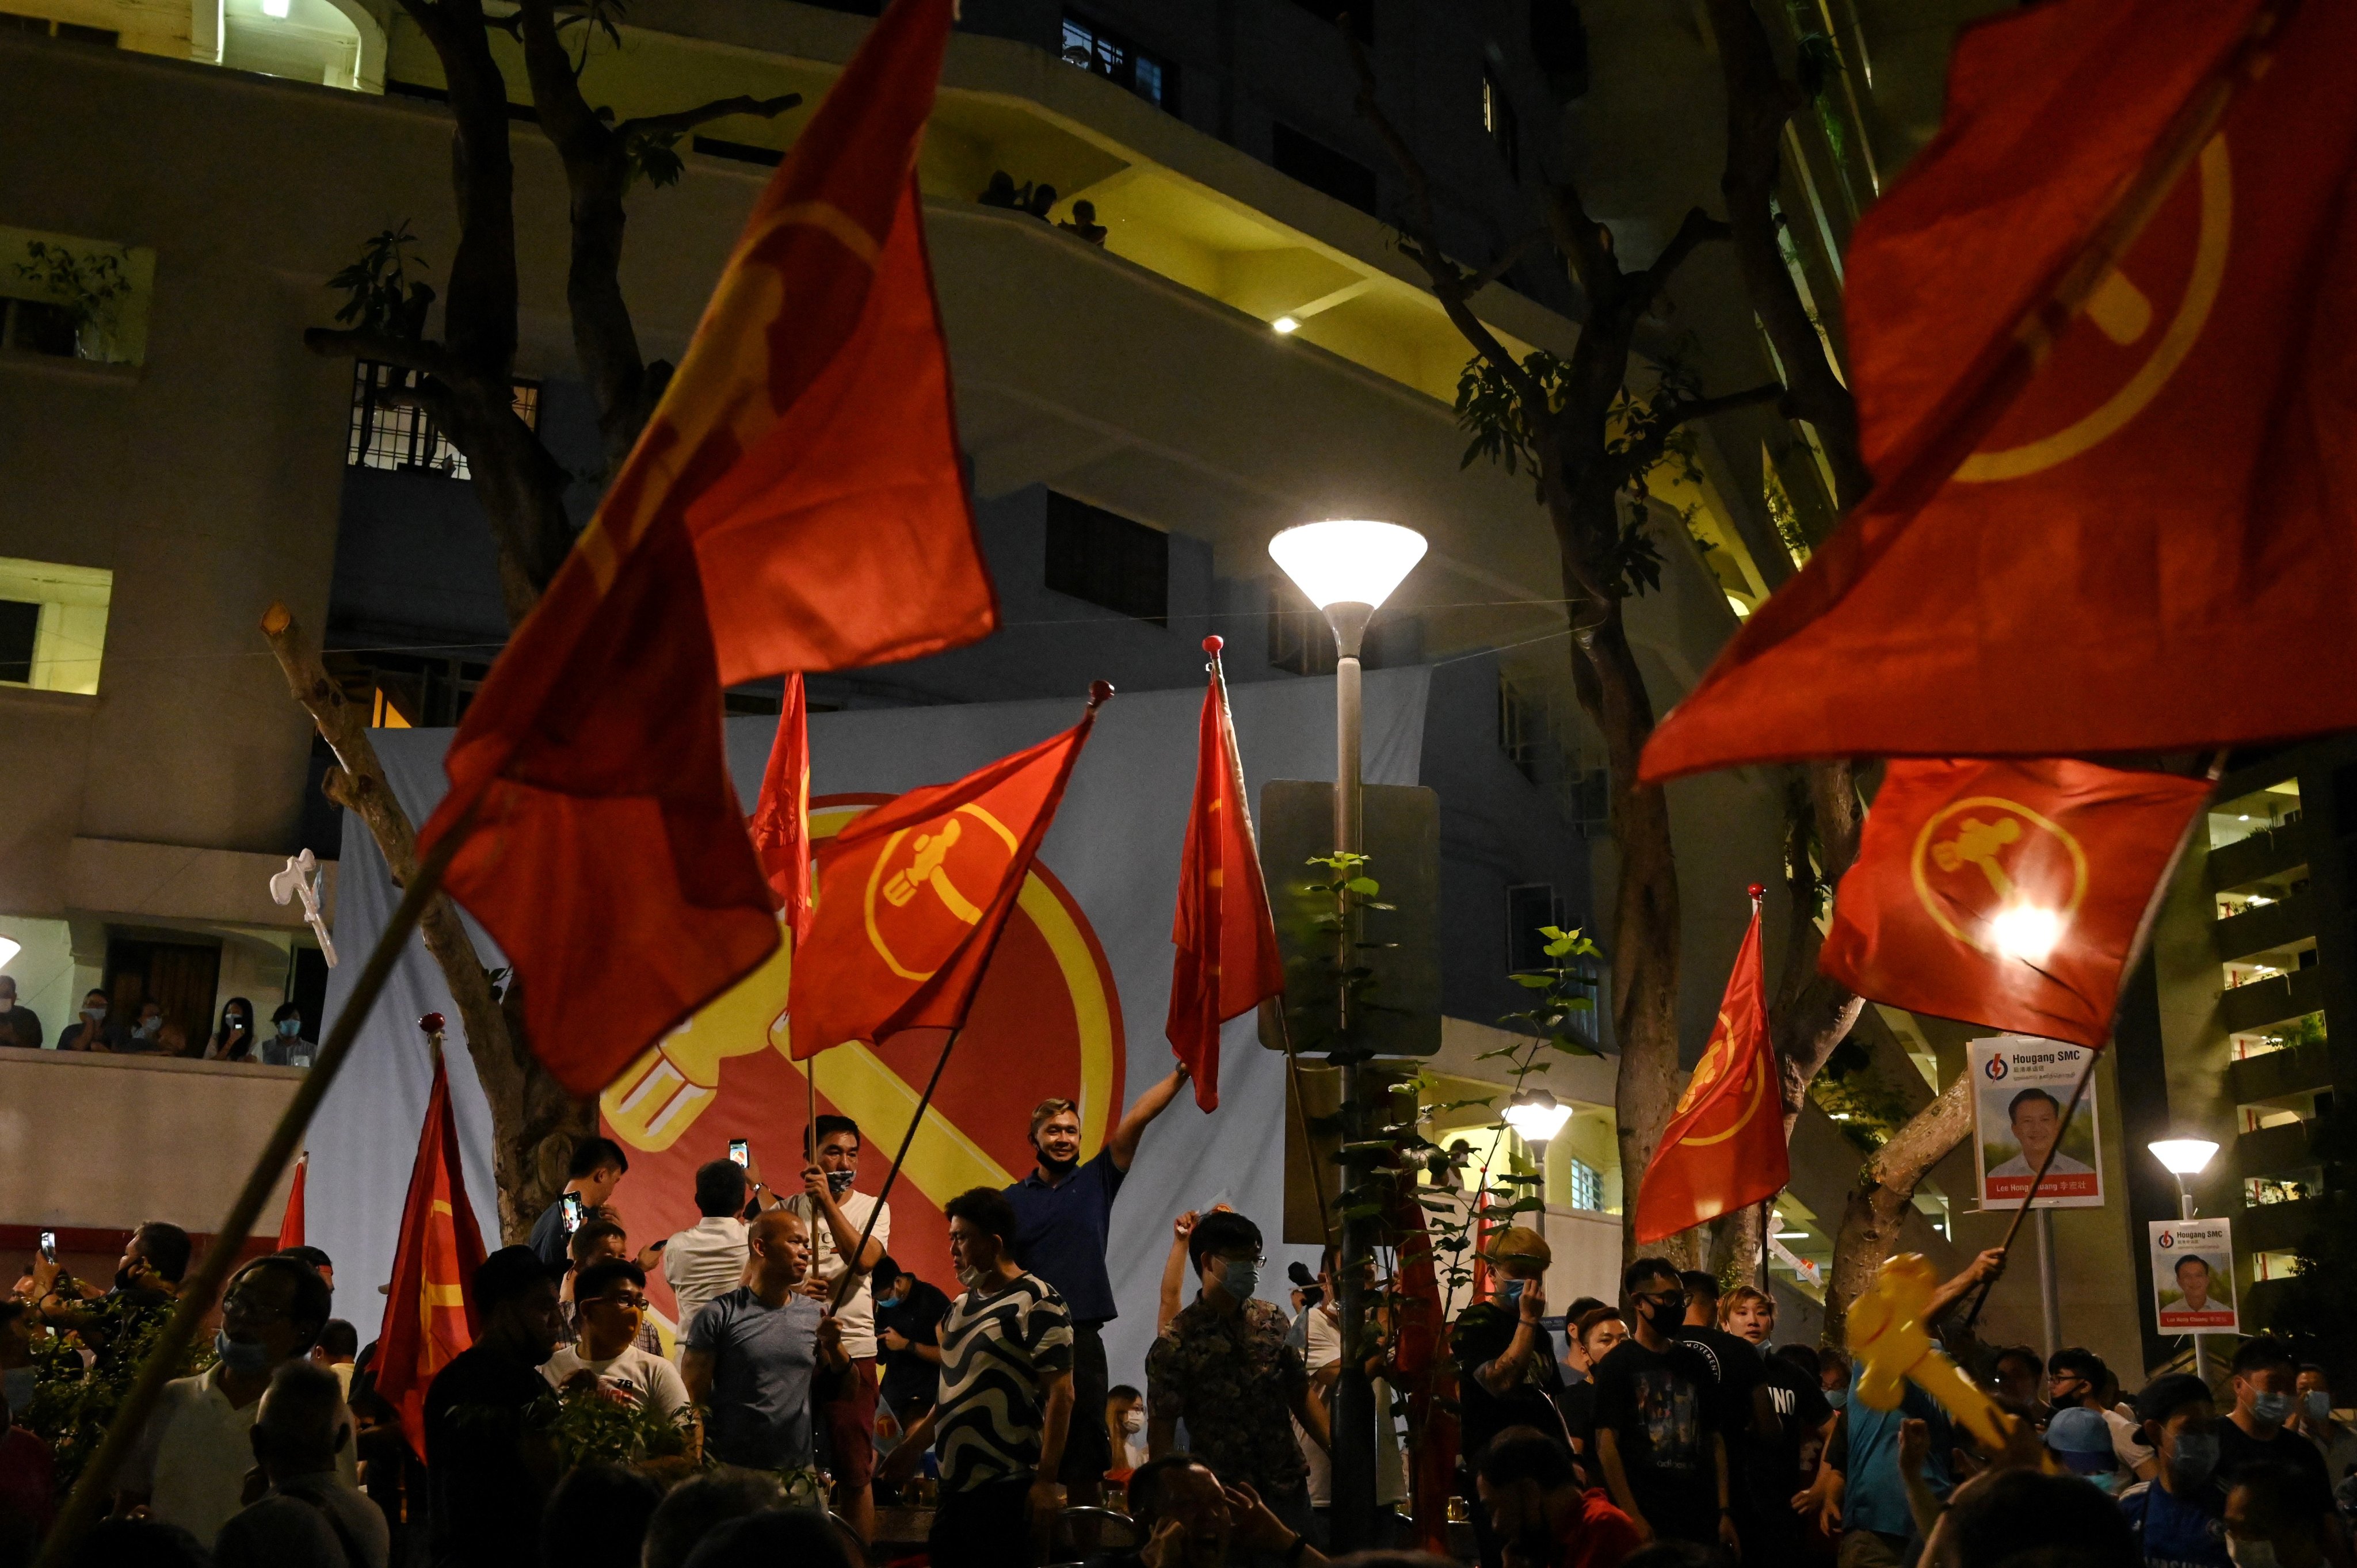 Supporters of the opposition Worker’s Party wave party flags at the Hougang public housing district during the general election in Singapore in July 2020. Photo: AFP